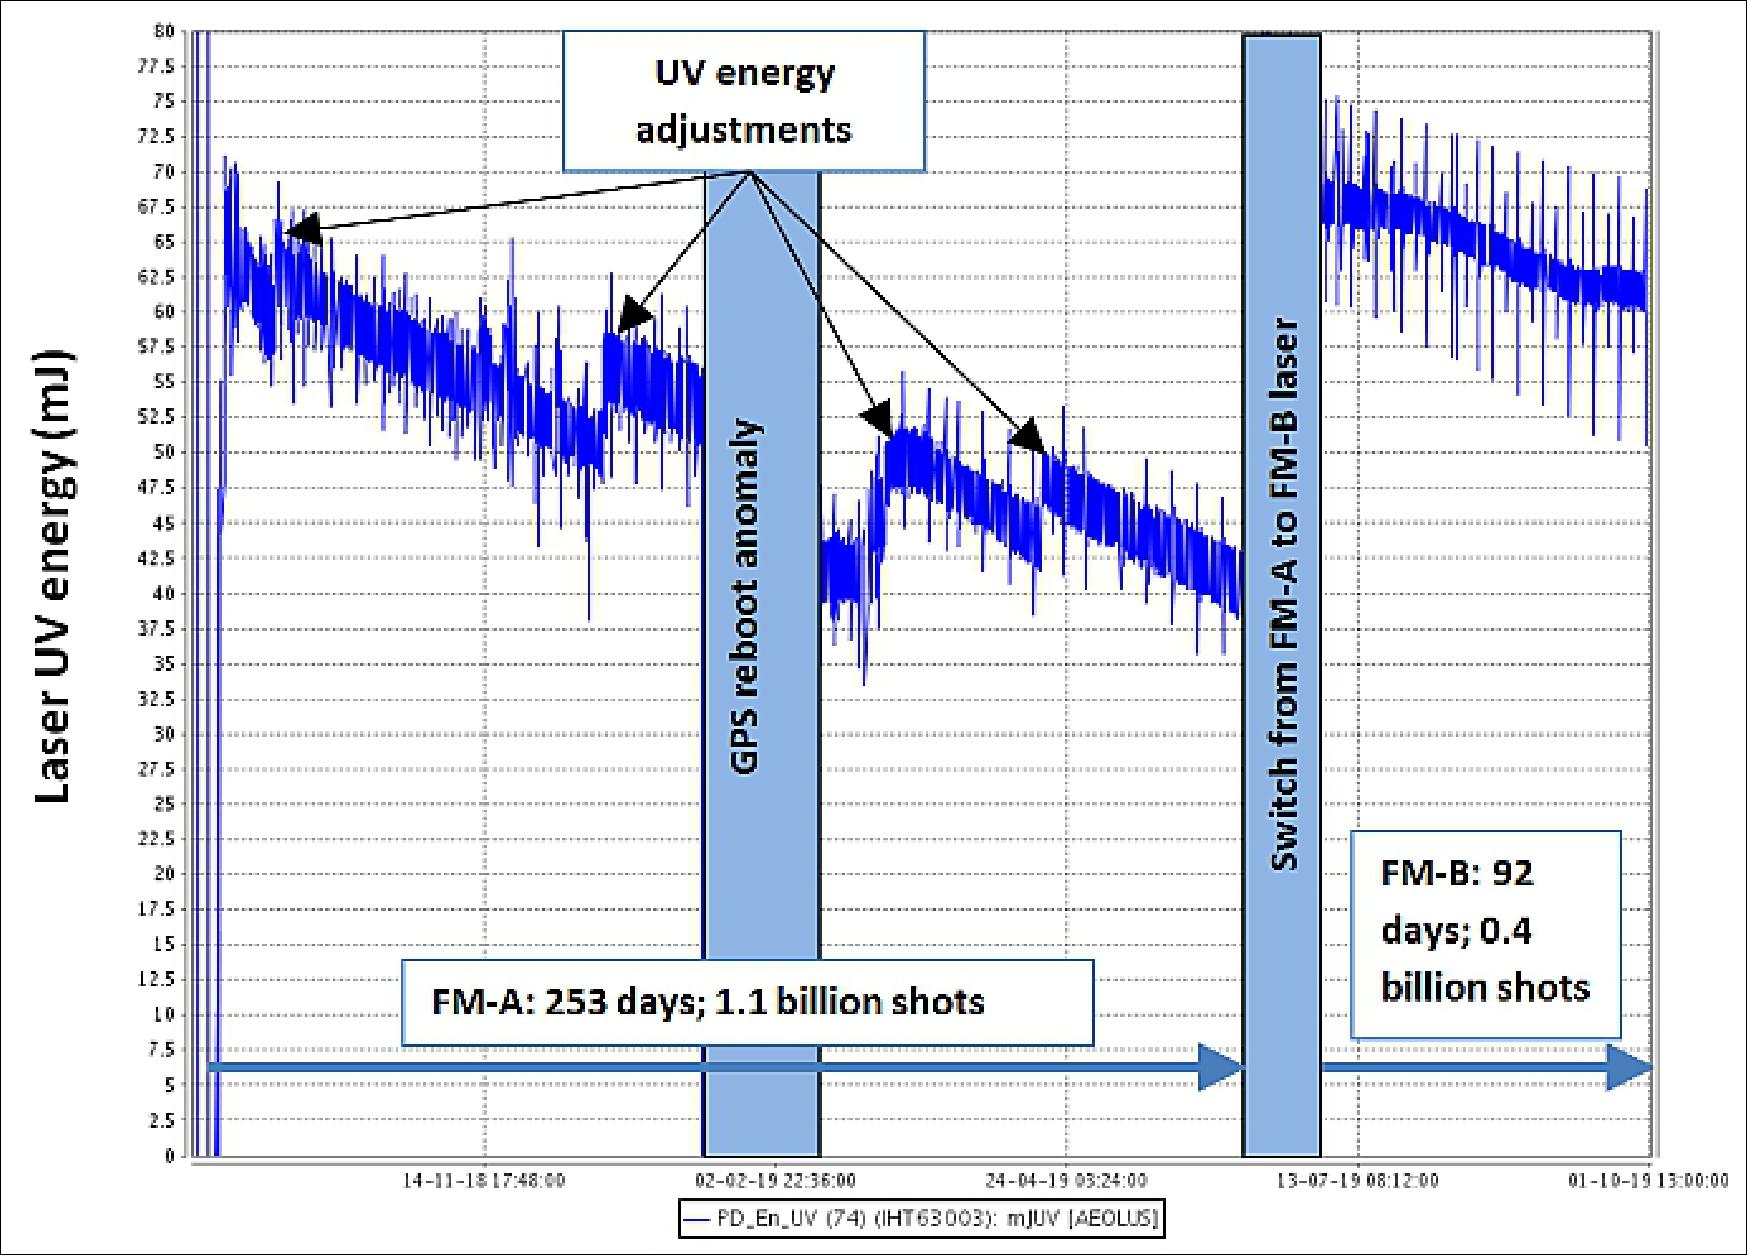 Figure 30: Laser transmitter UV energy over the first year of the Aeolus mission (image credit: ESA)